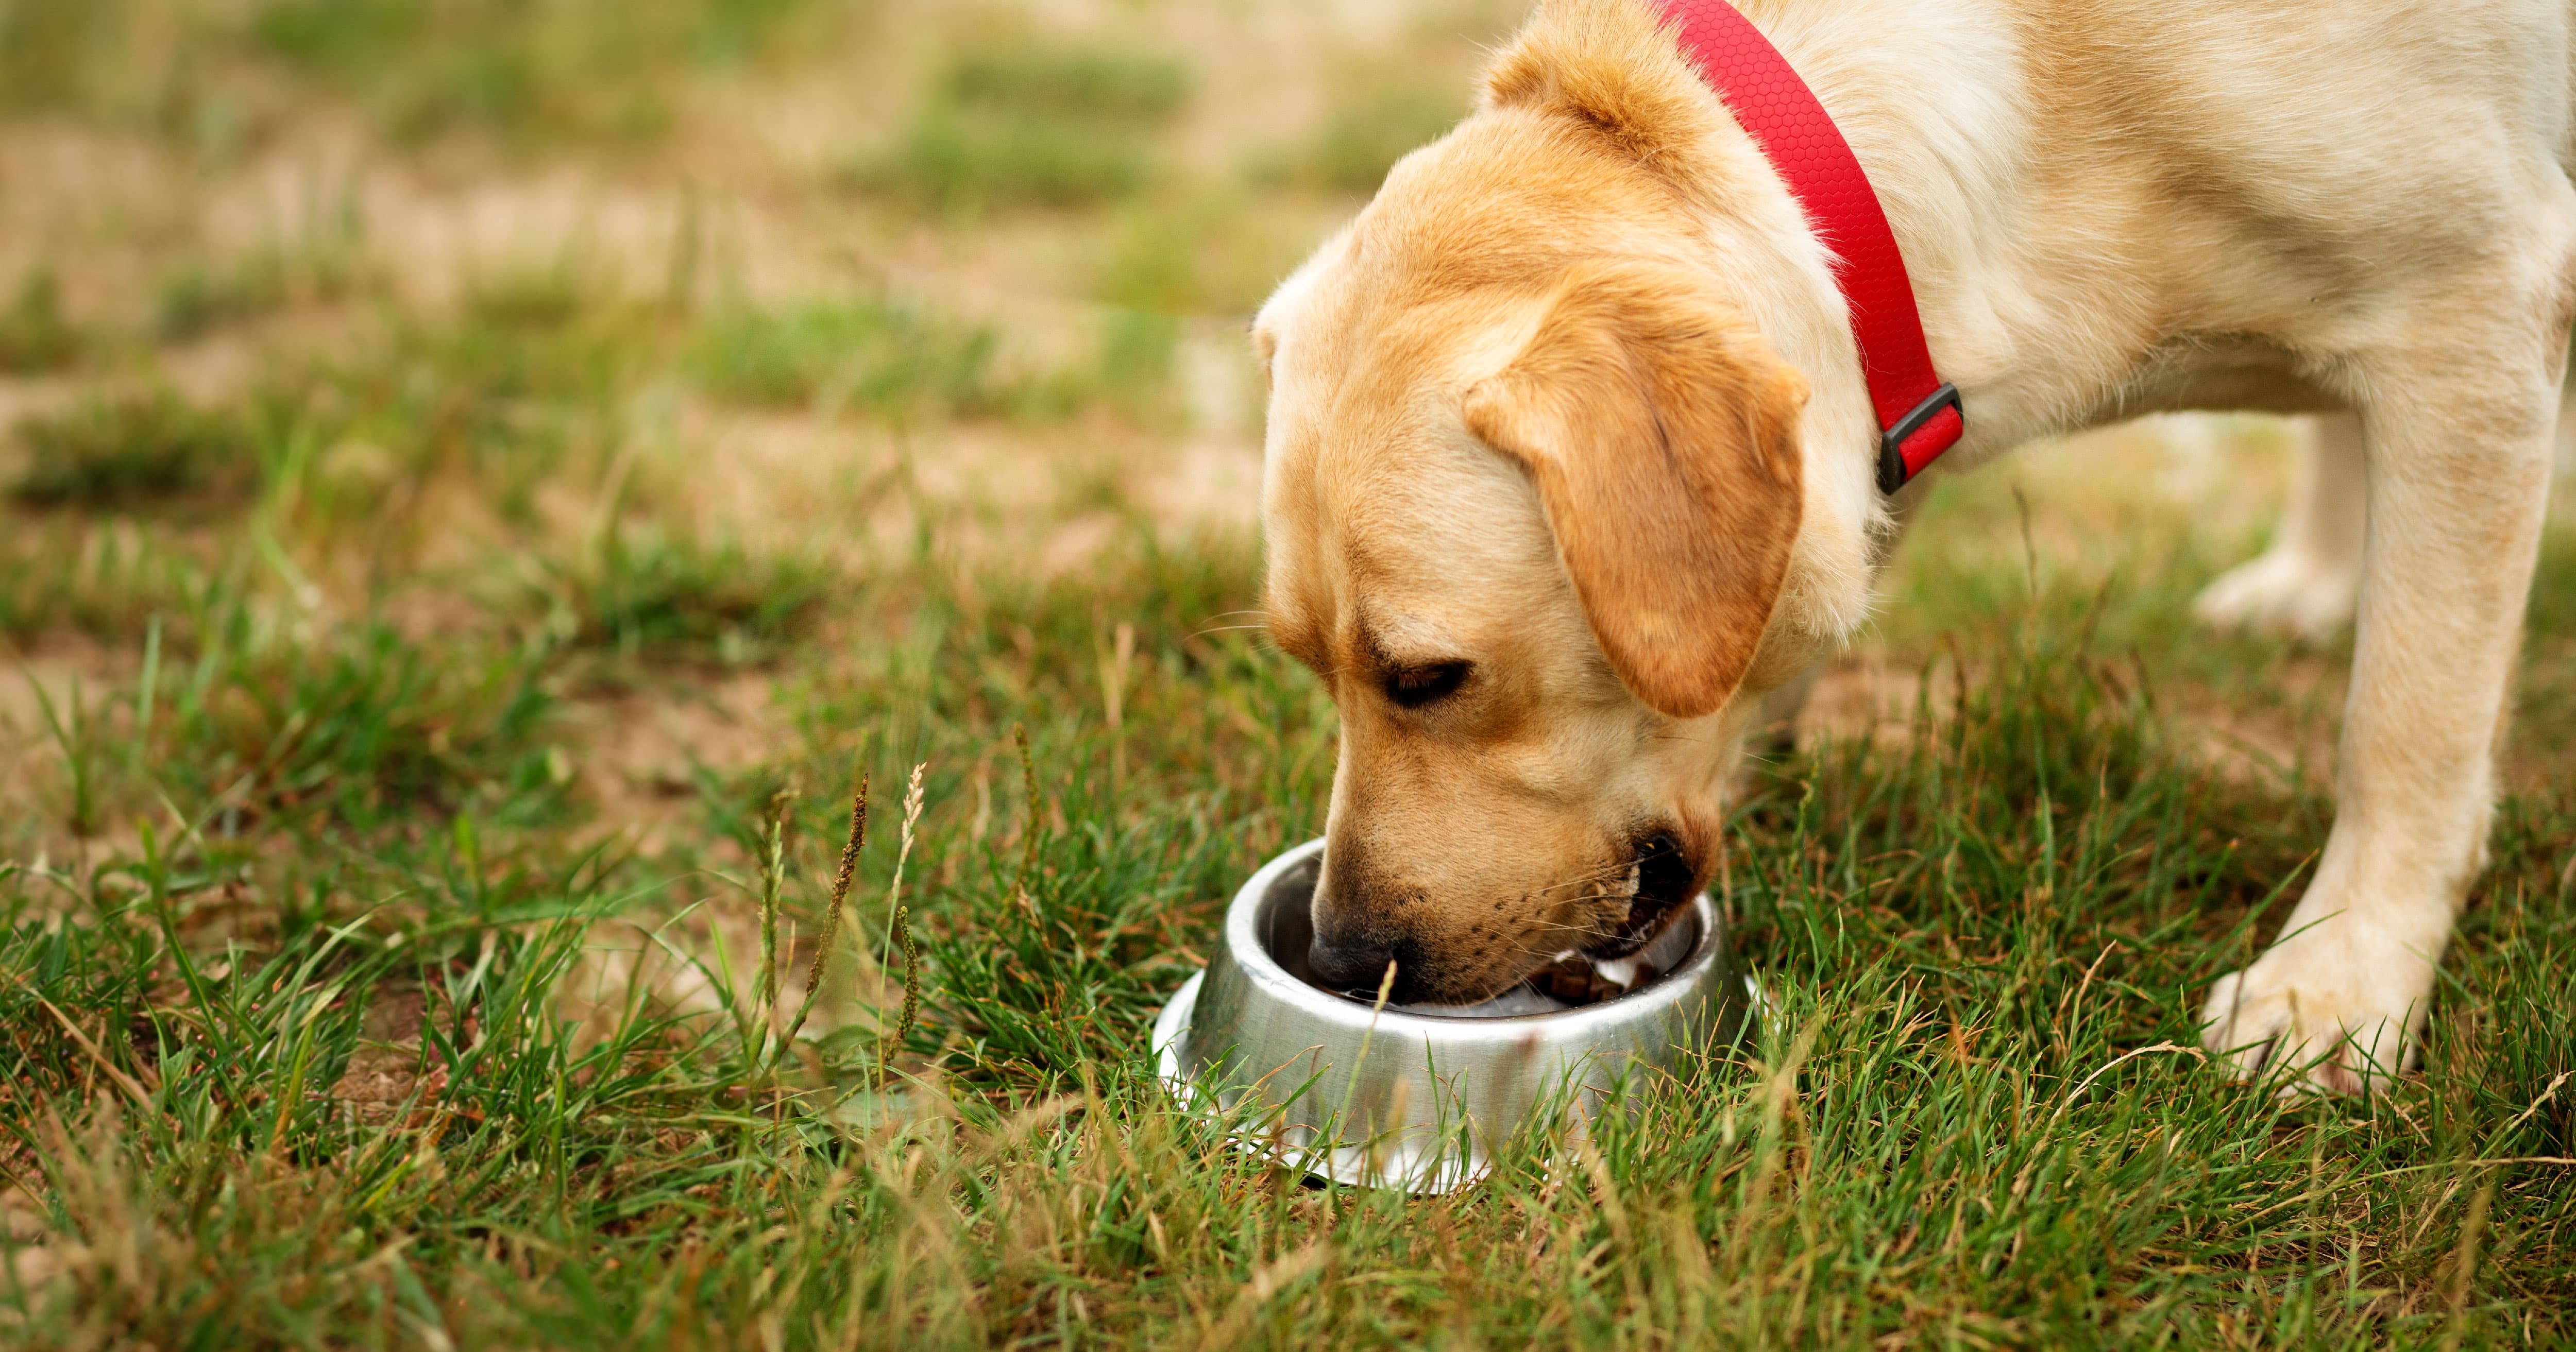 A dog eating kibble out of a metal bowl on the ground outside.